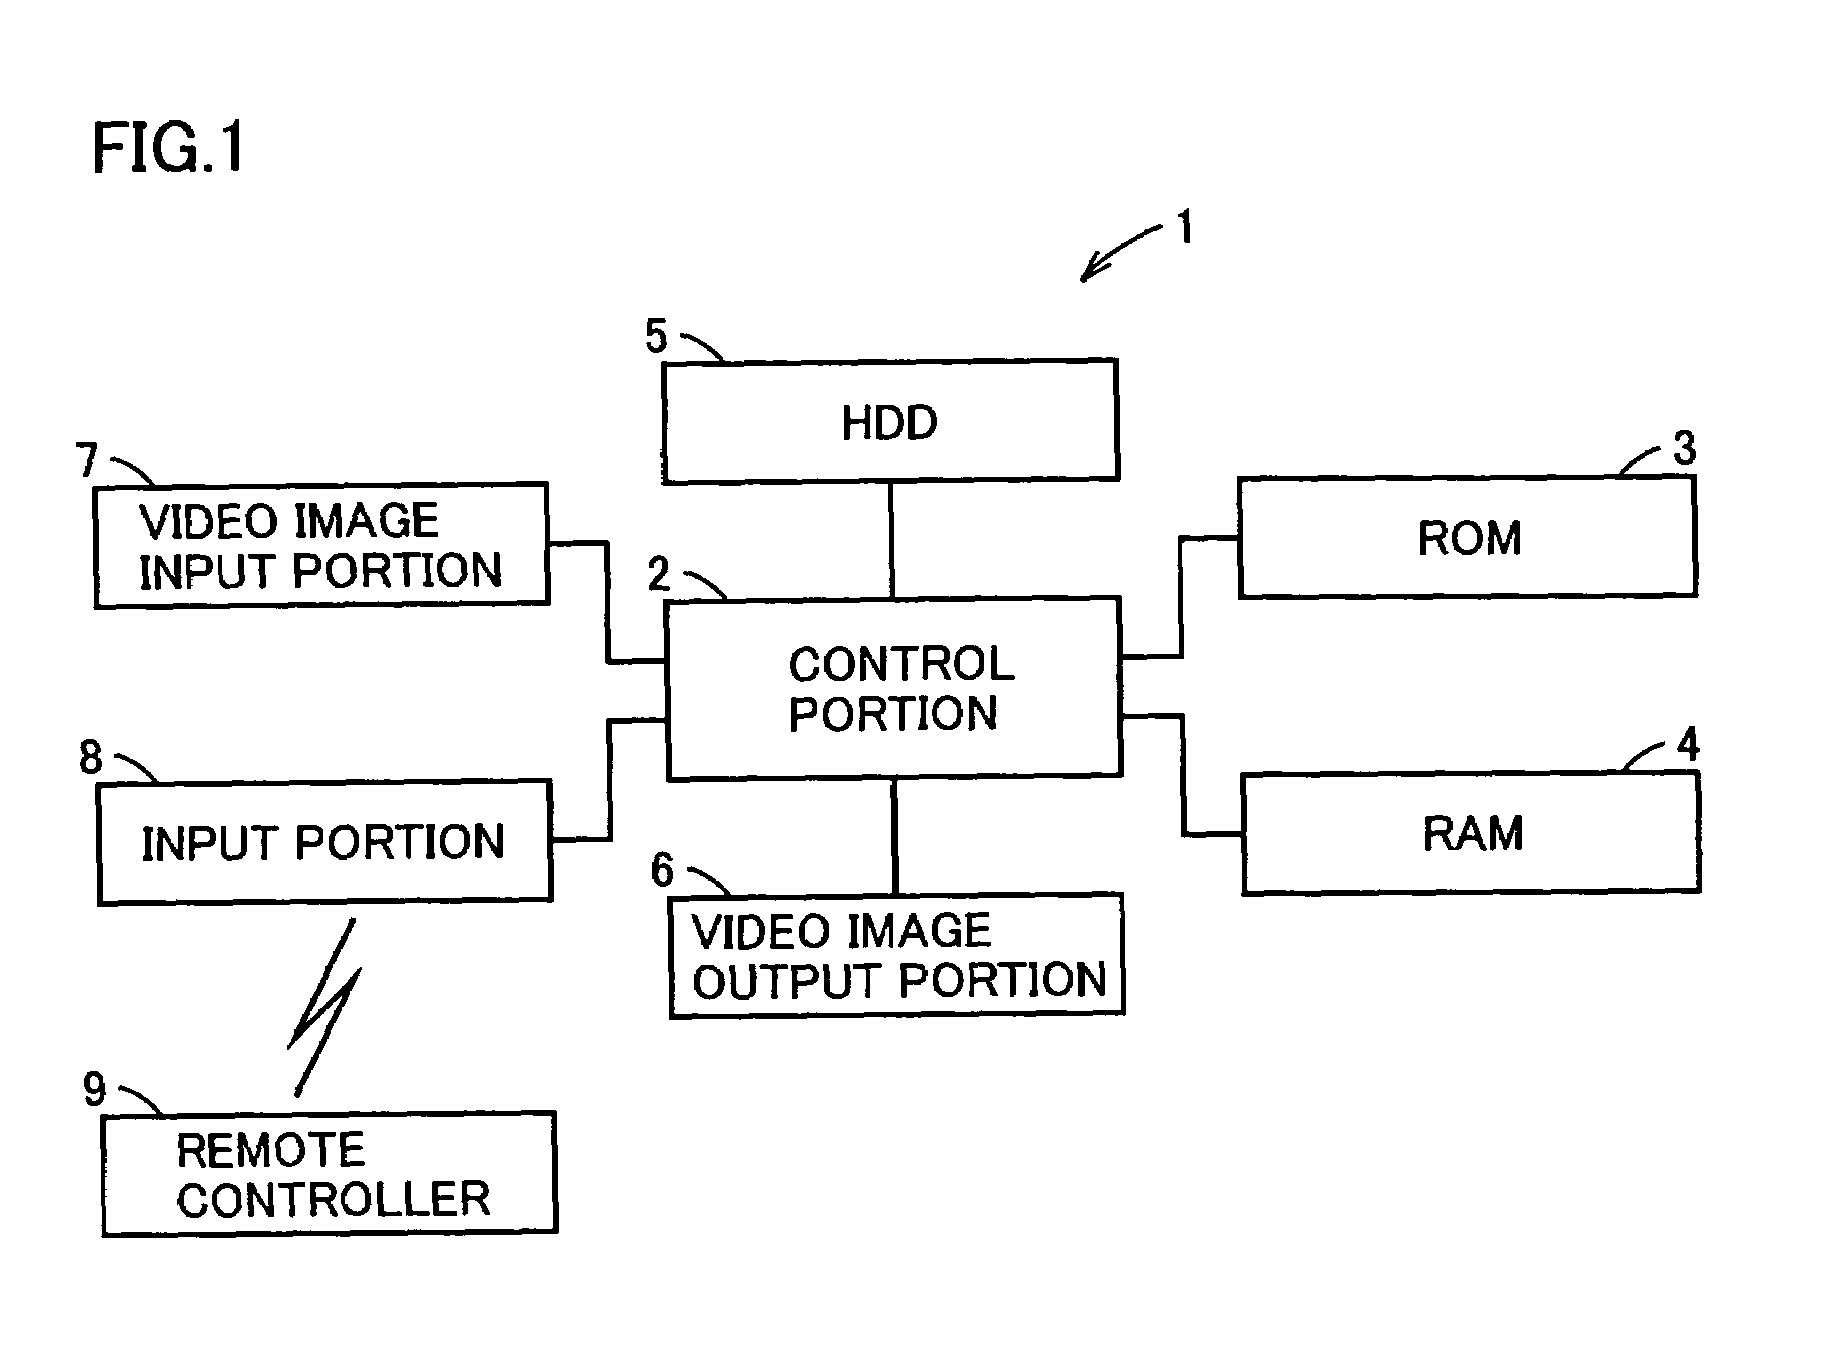 Data storage and reproduction apparatus storing and reproducing multimedia data